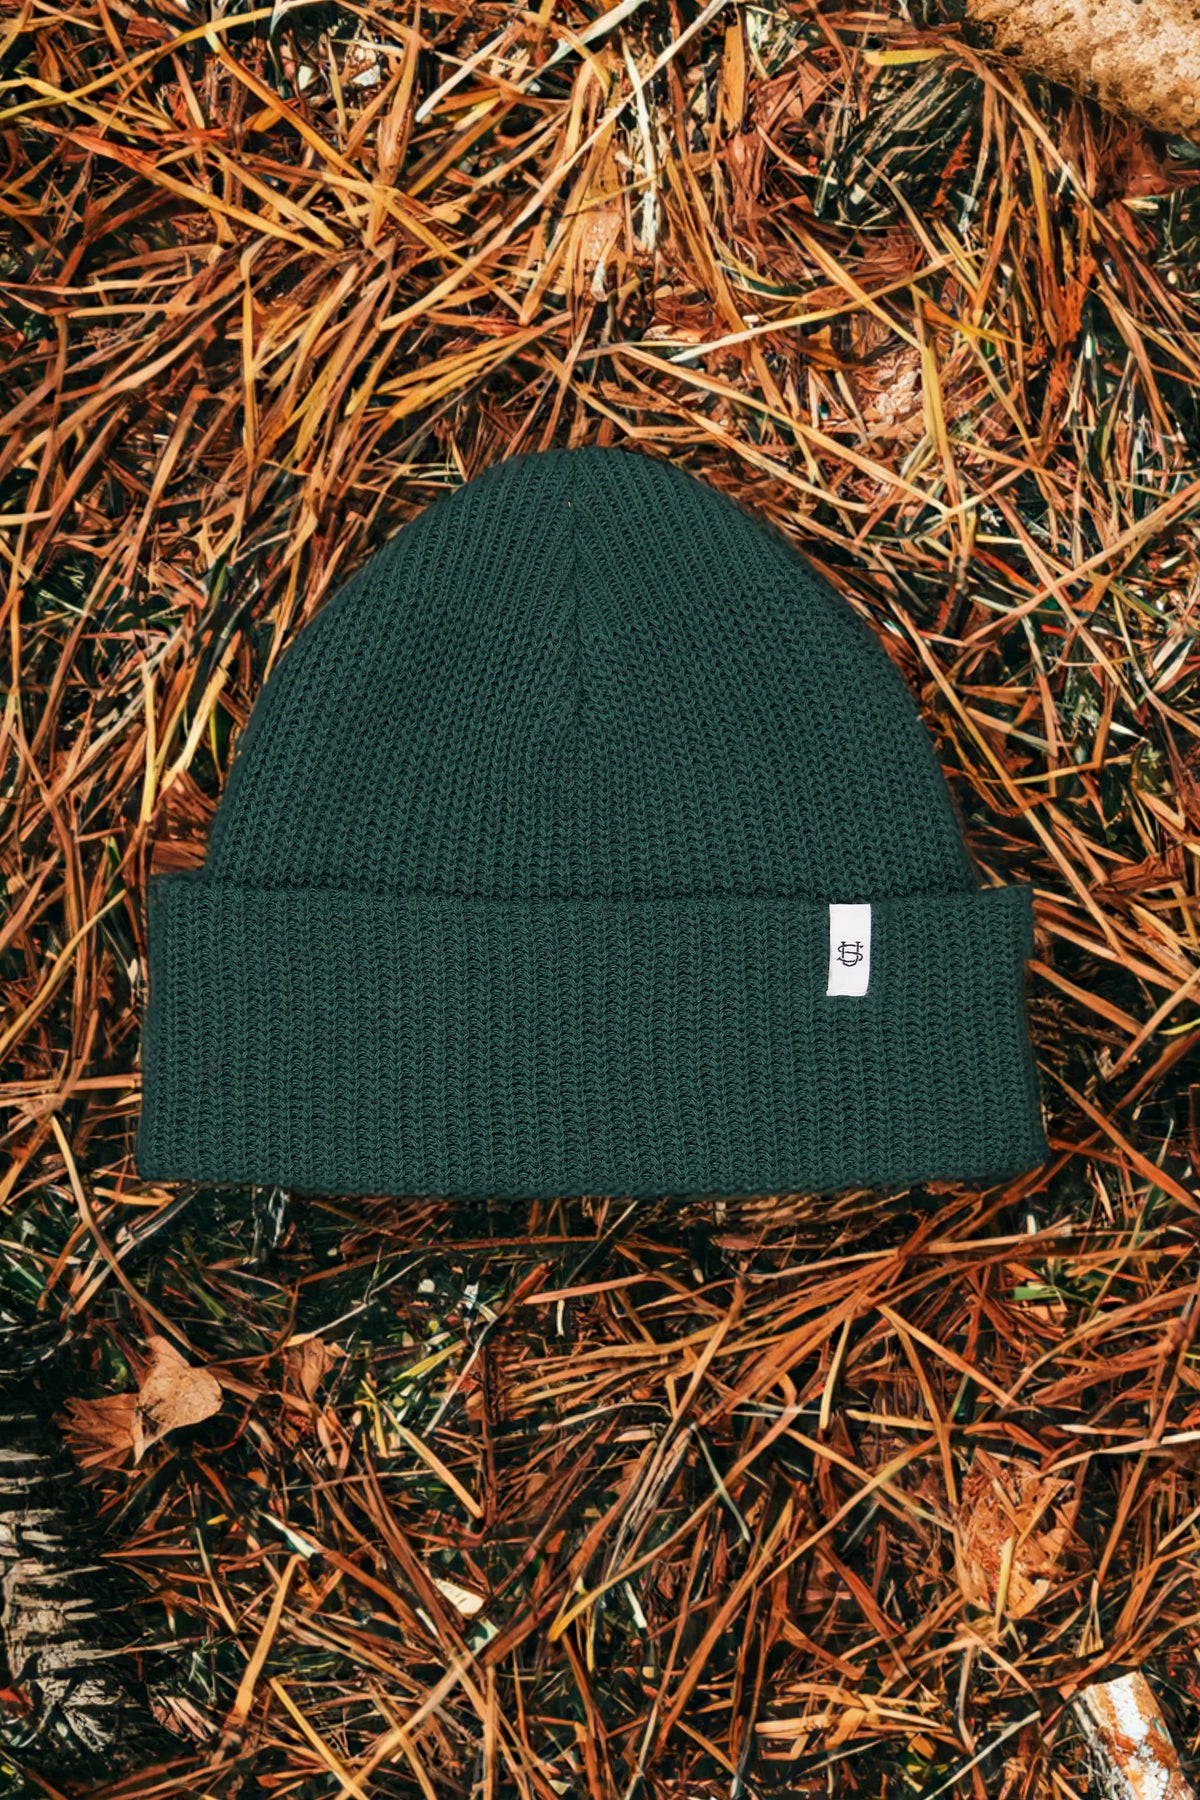 NEW Adirondack Green Upcycled Cotton Watchcap